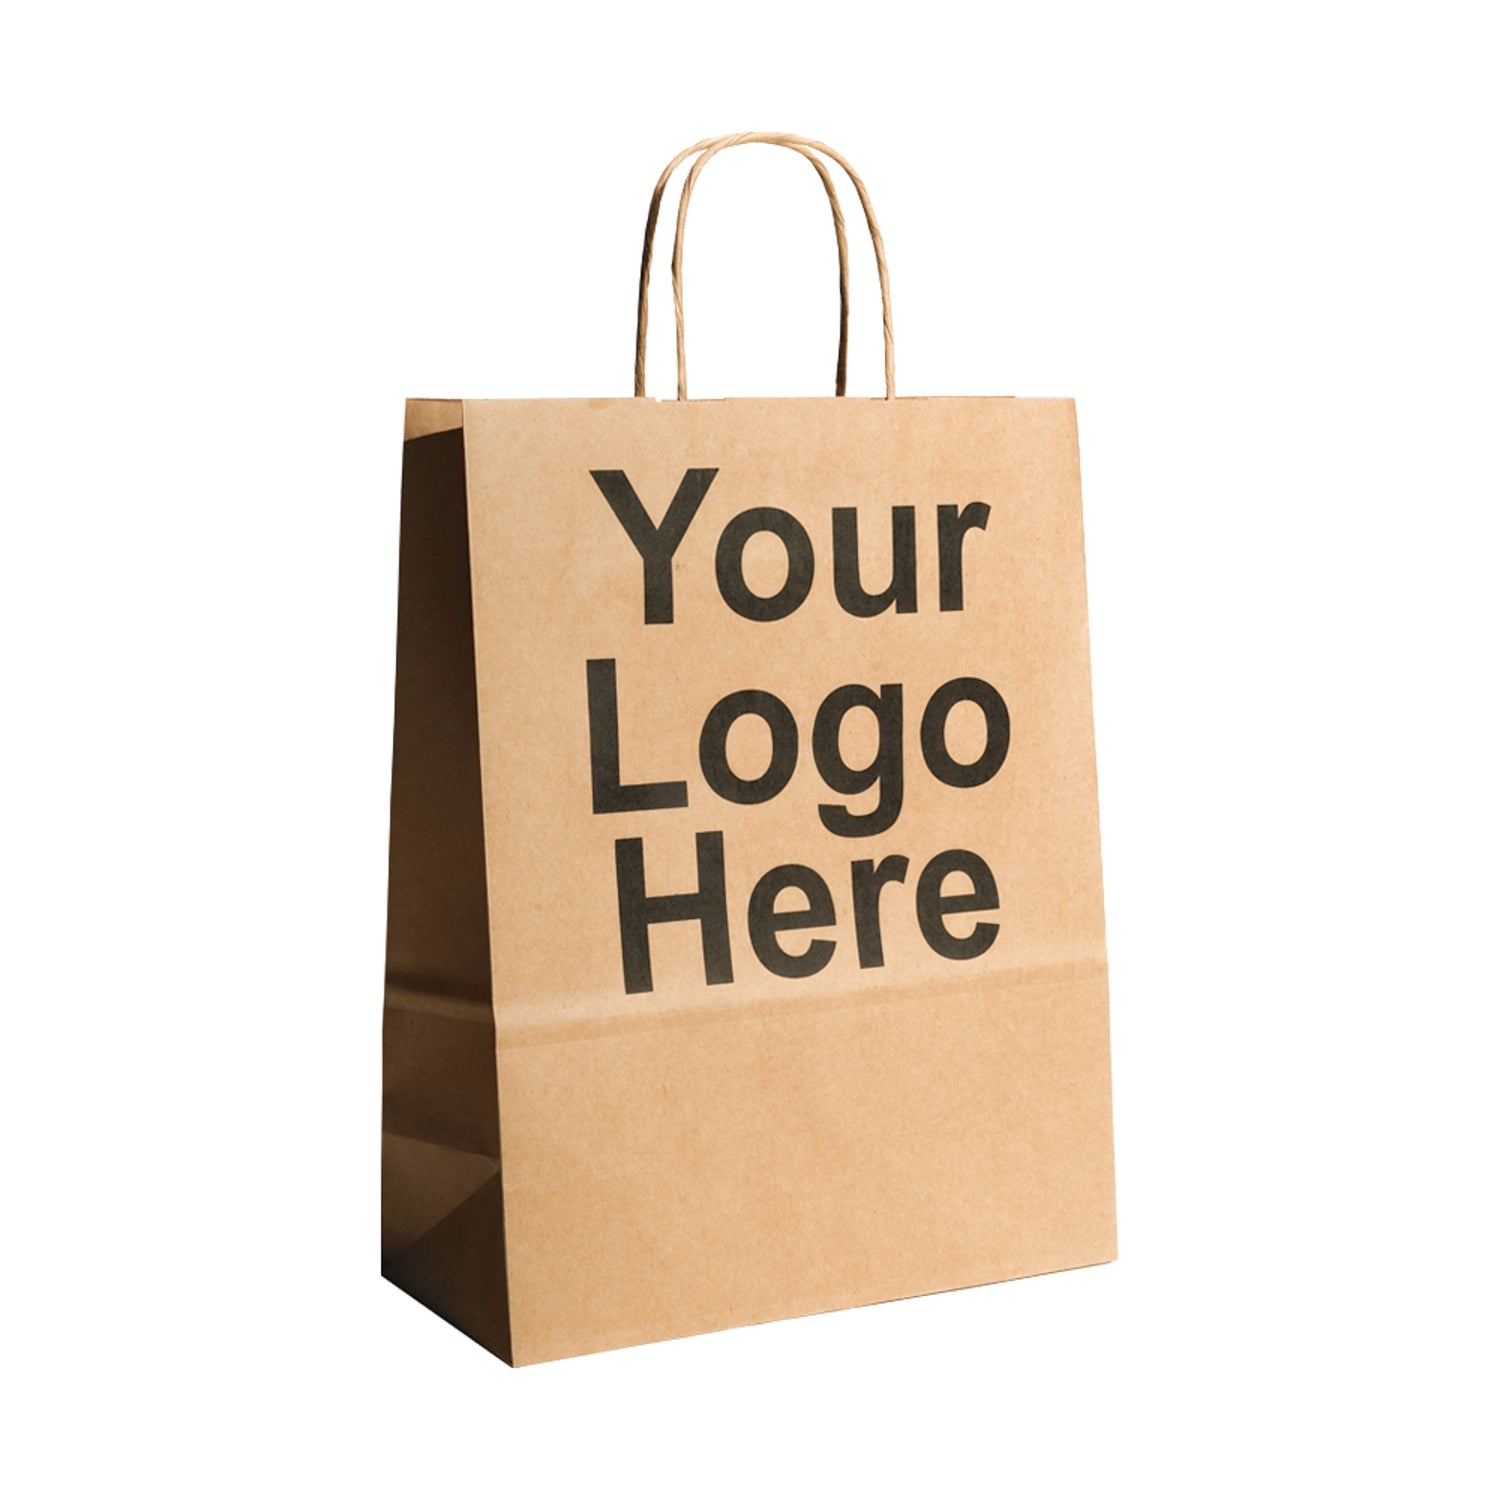 Printed Brown Kraft Twisted Handle Carrier Bags (3 SIZES)